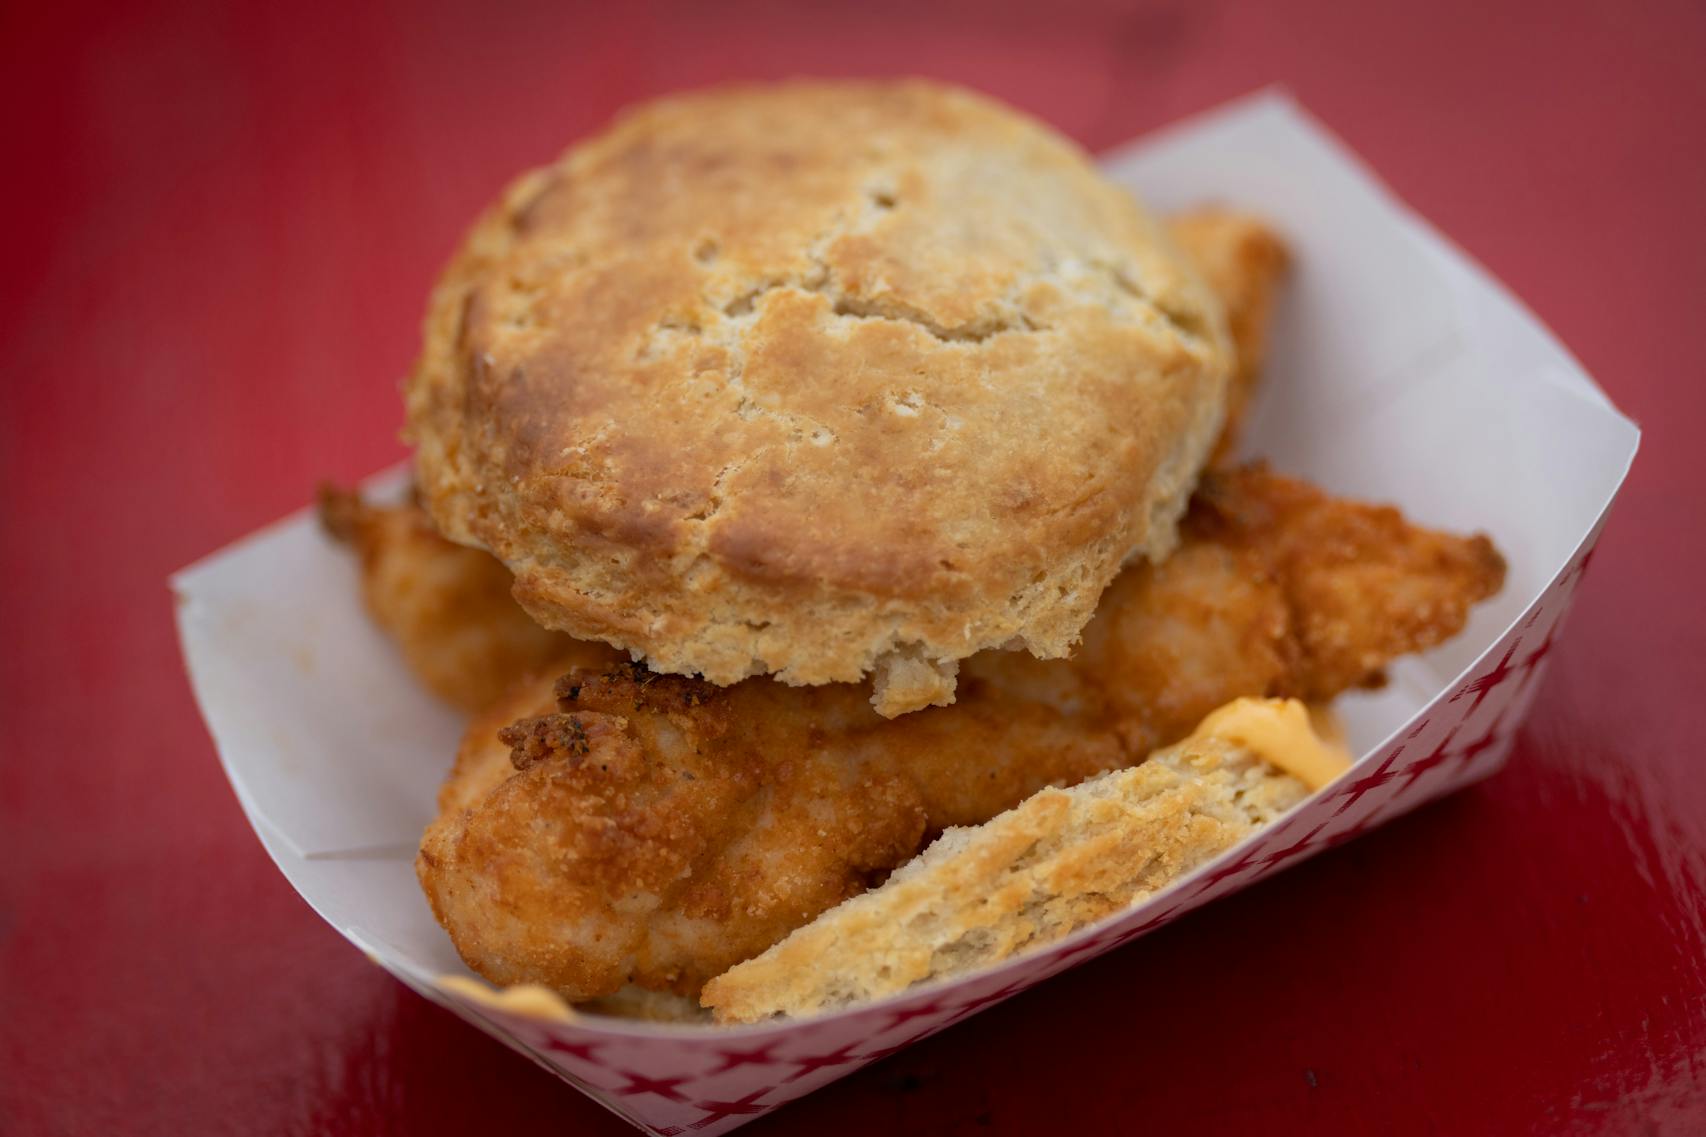 Southern Chicken Biscuit Sandwich from Lulu’s Public House. New foods at the Minnesota State Fair photographed on Thursday, Aug. 25, 2022 in Falcon Heights, Minn. ] RENEE JONES SCHNEIDER • renee.jones@startribune.com